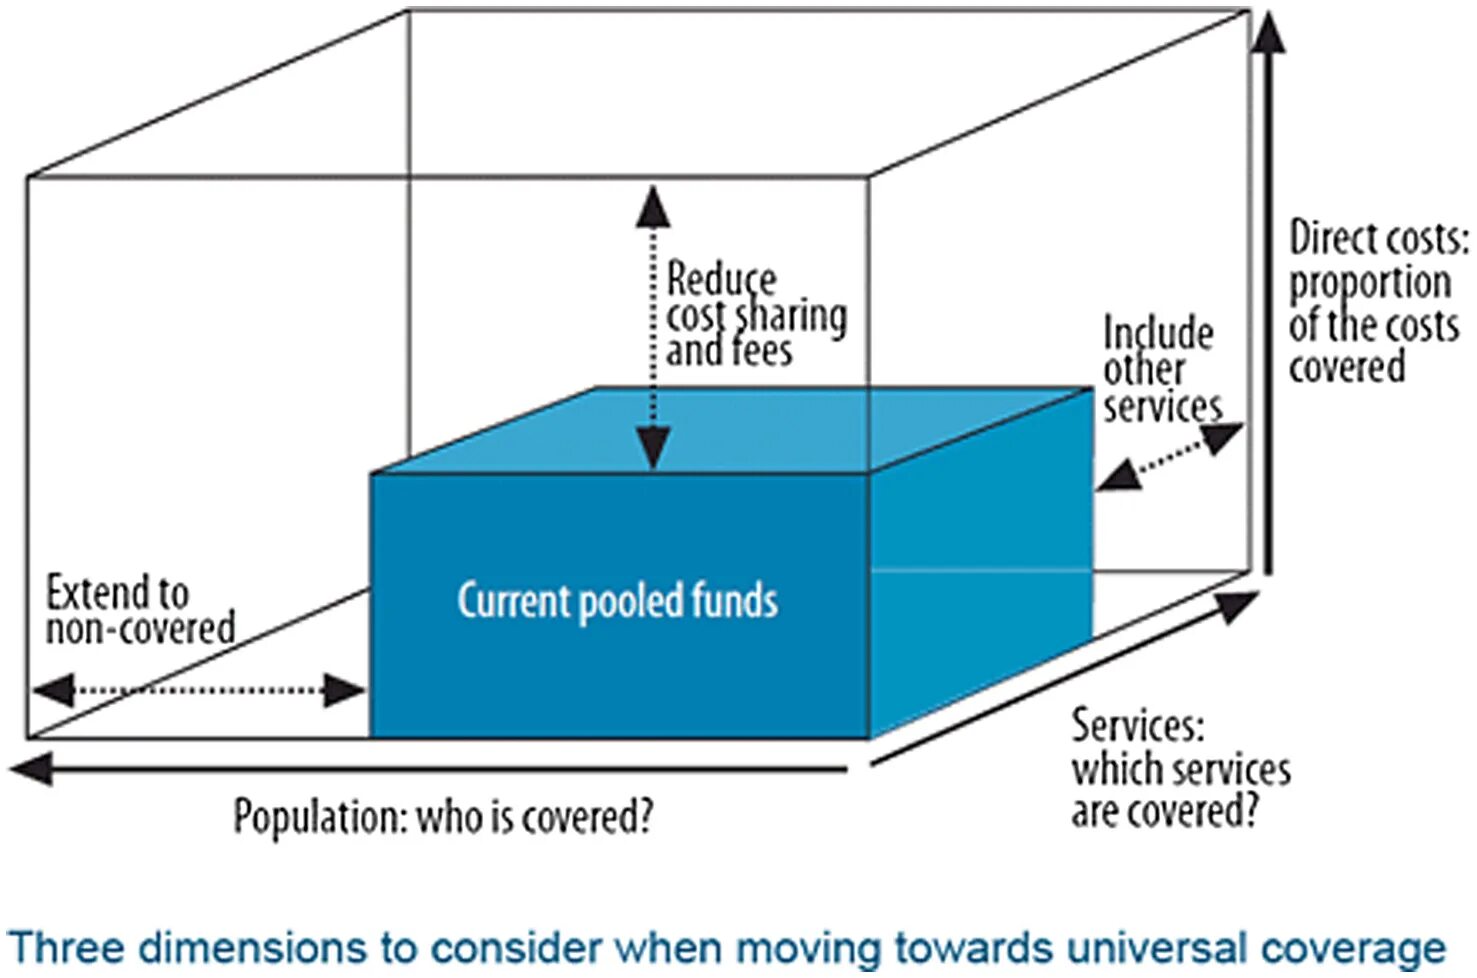 3 Dimensions. Universal coverage. Direct costs. Cube Pilot Dimensions. Other costs